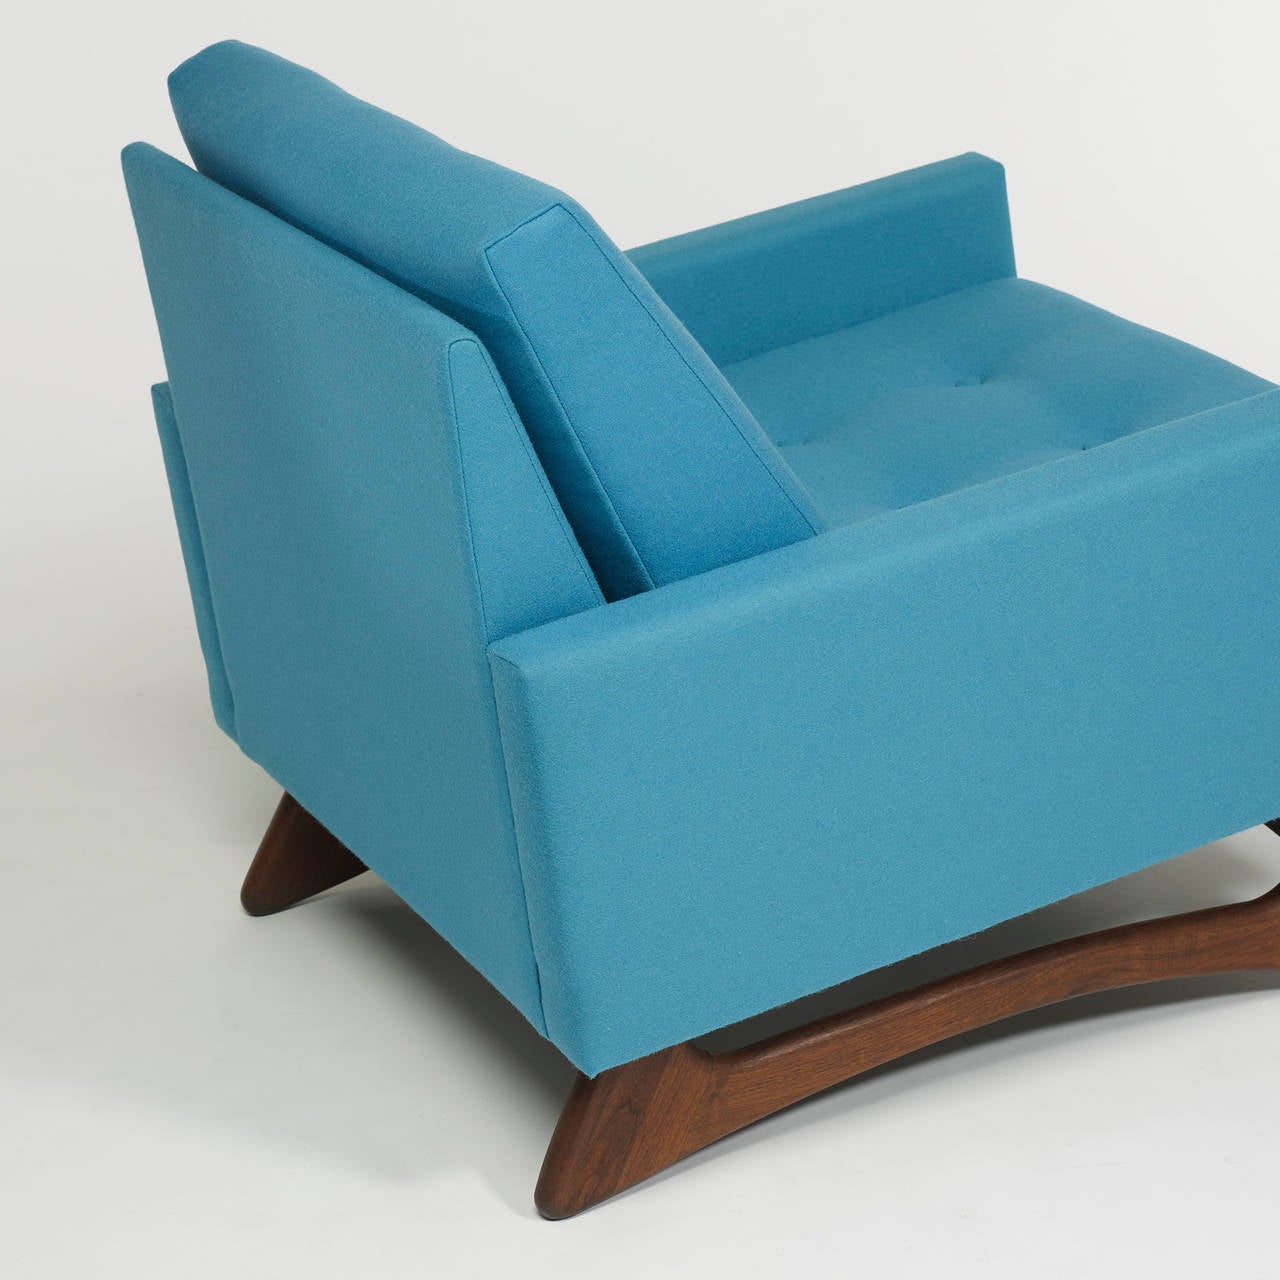 Upholstery Lounge Chairs, Pair by Adrian Pearsall for Craft Associates